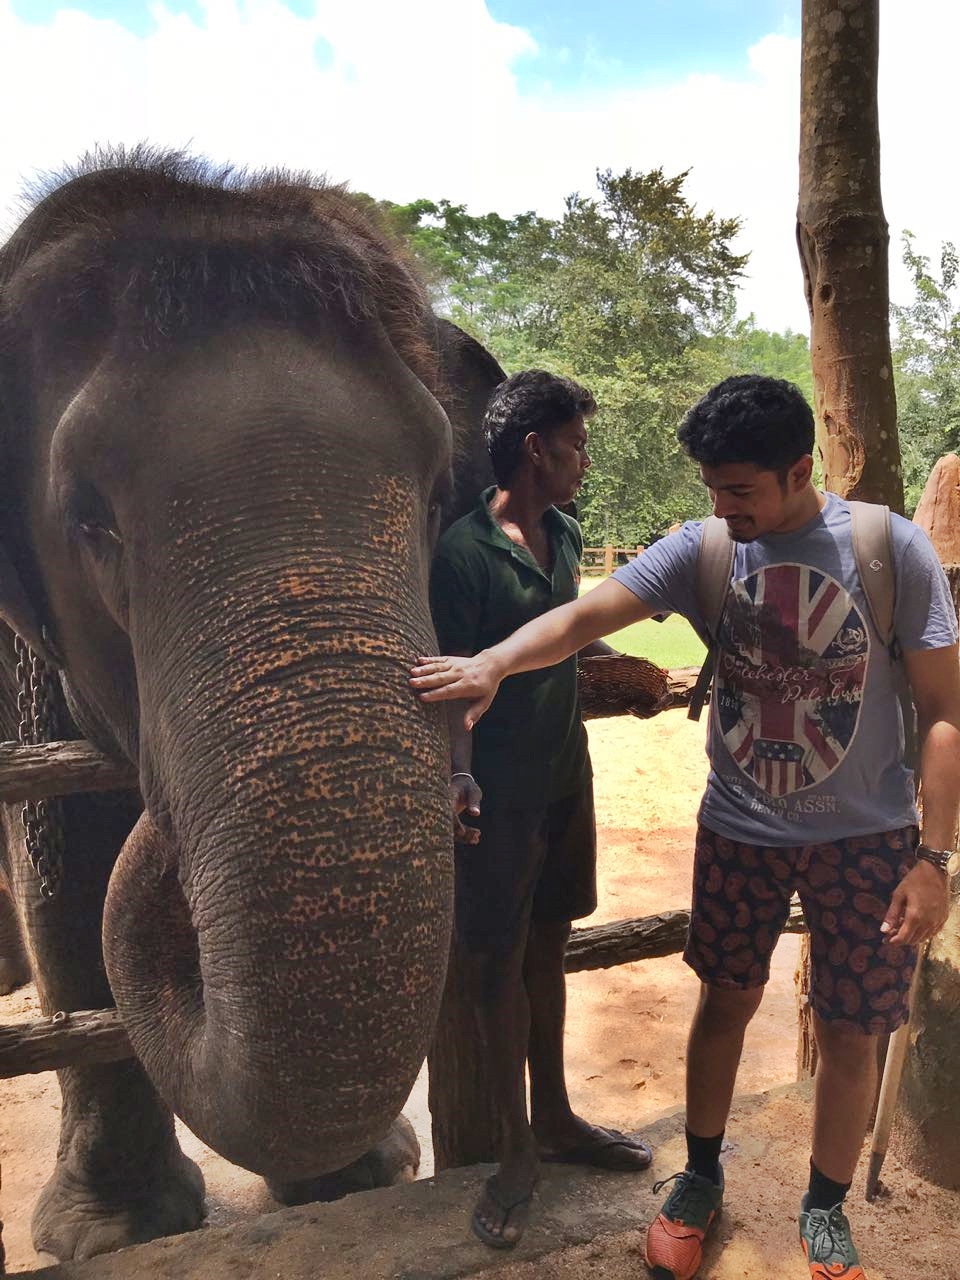 Feeding the elephants at Pinnawala Orphanage is one of the best things to do in Sri Lanka